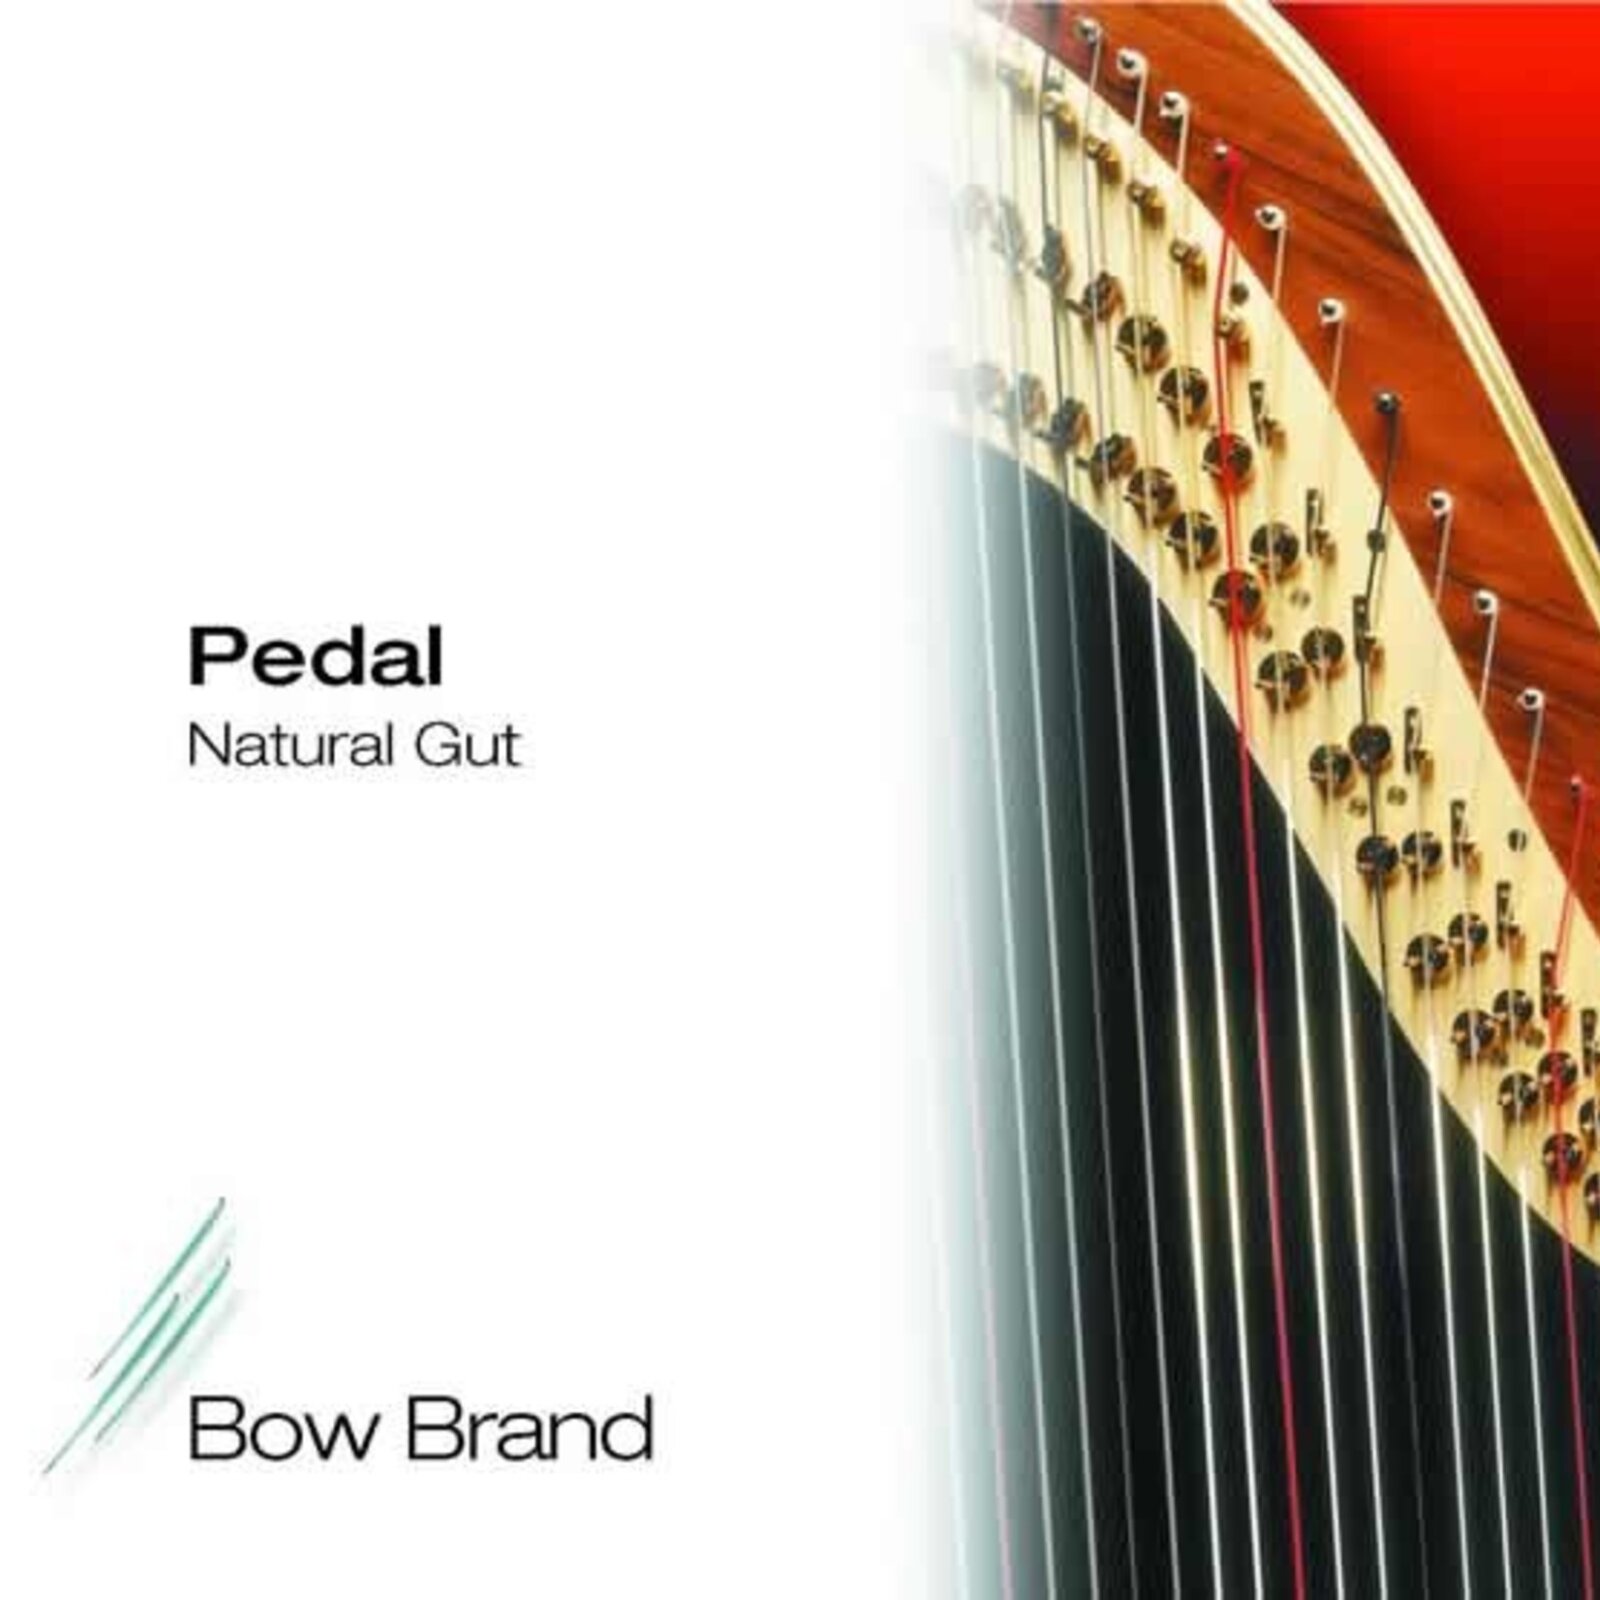 Bow Brand N 2 D 1st octave in gut for pedal harp : photo 1